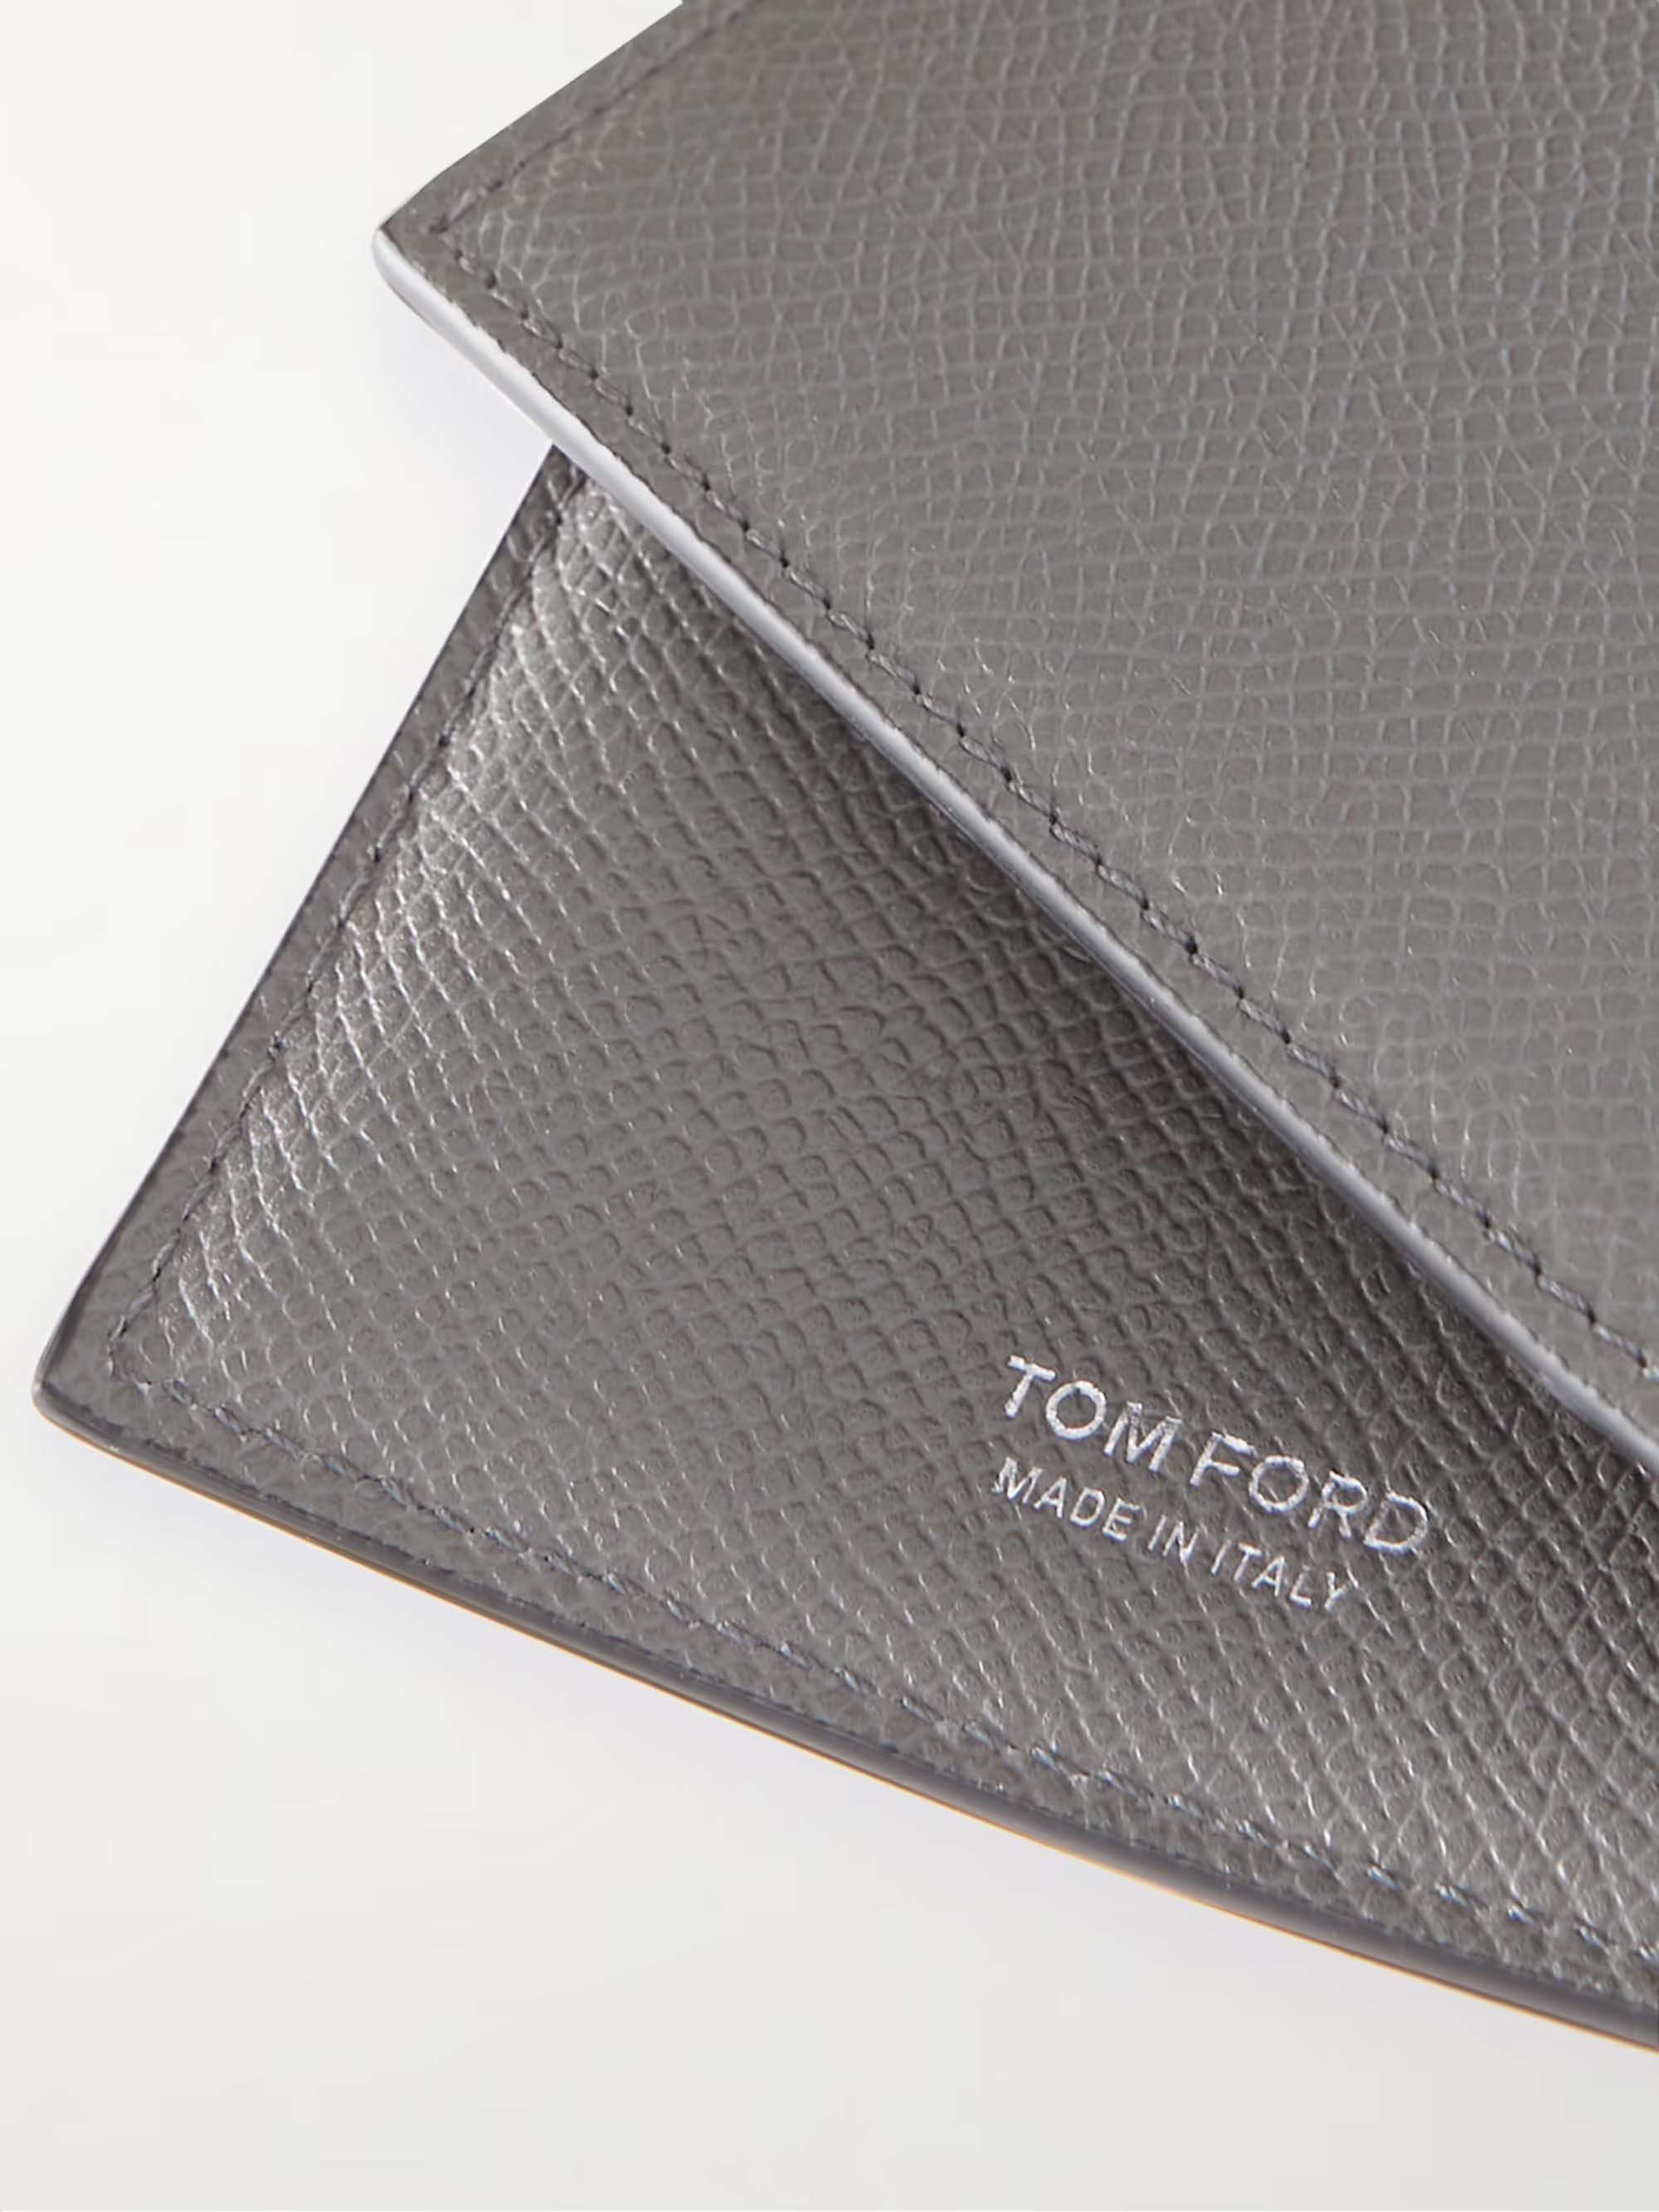 Tom Ford Grain Leather Passport Cover